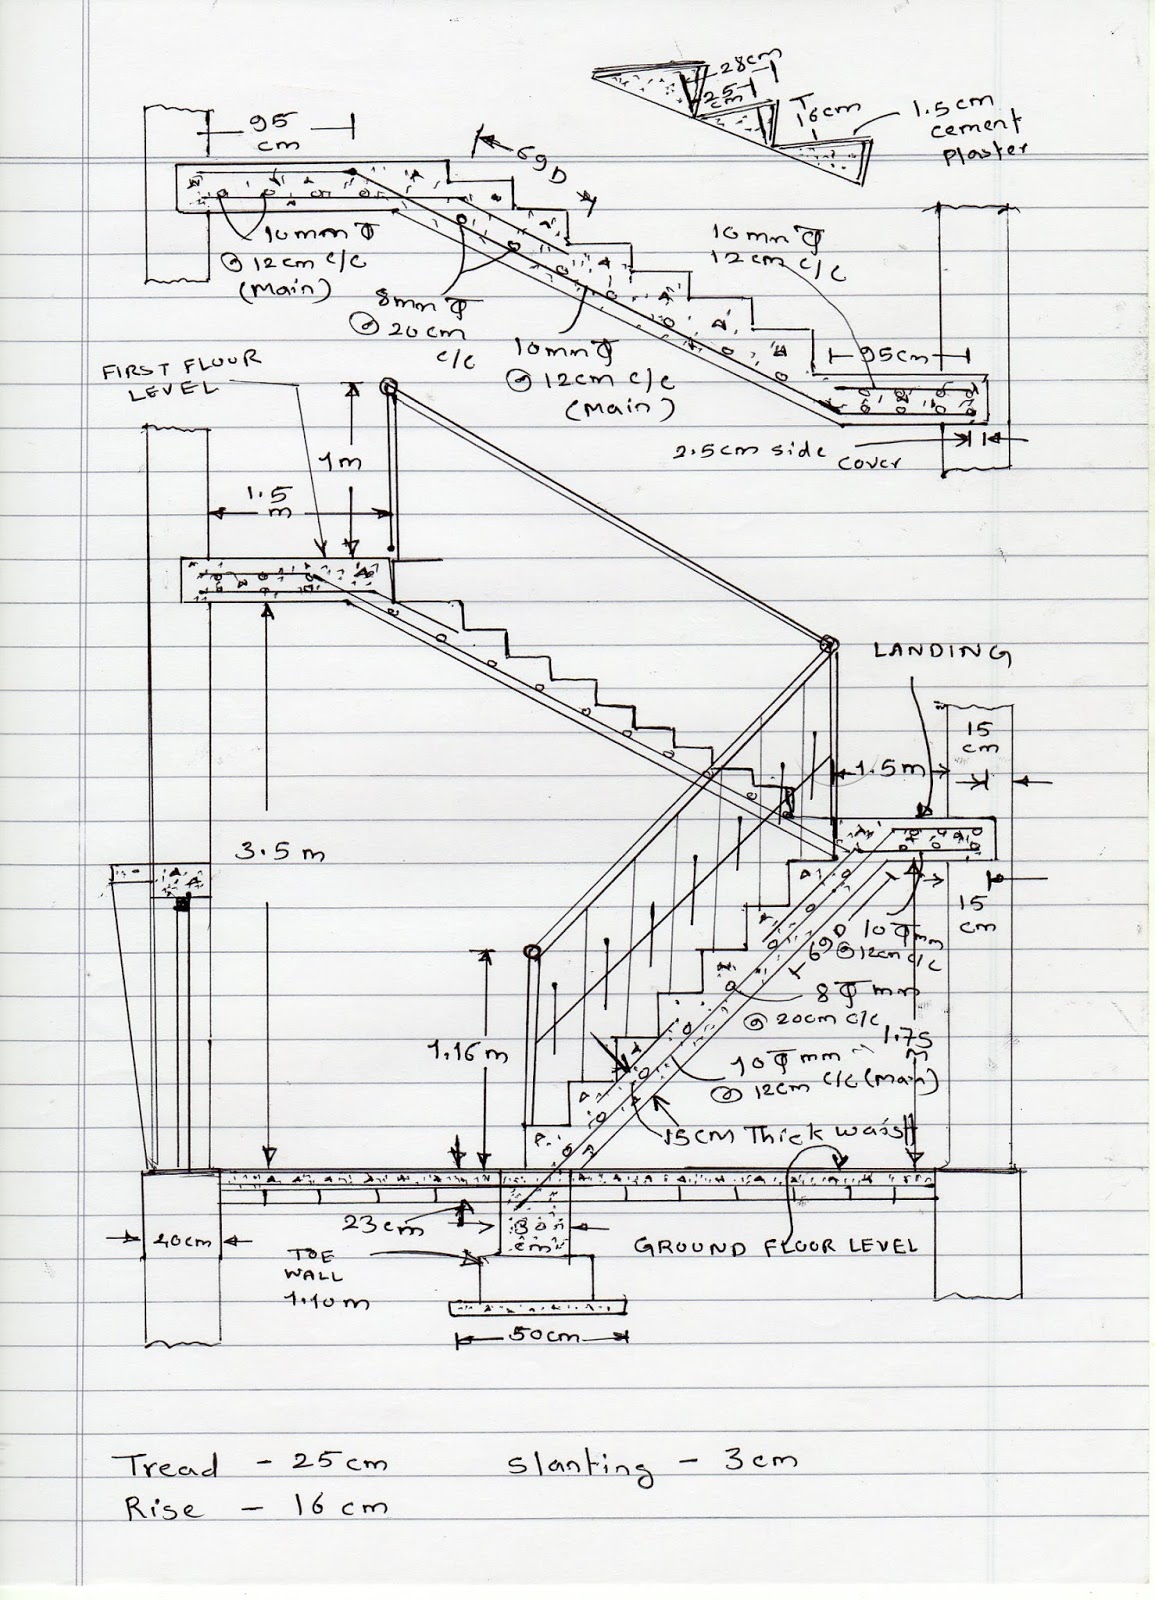 Concrete Quantity Calculations For The Staircase Construction